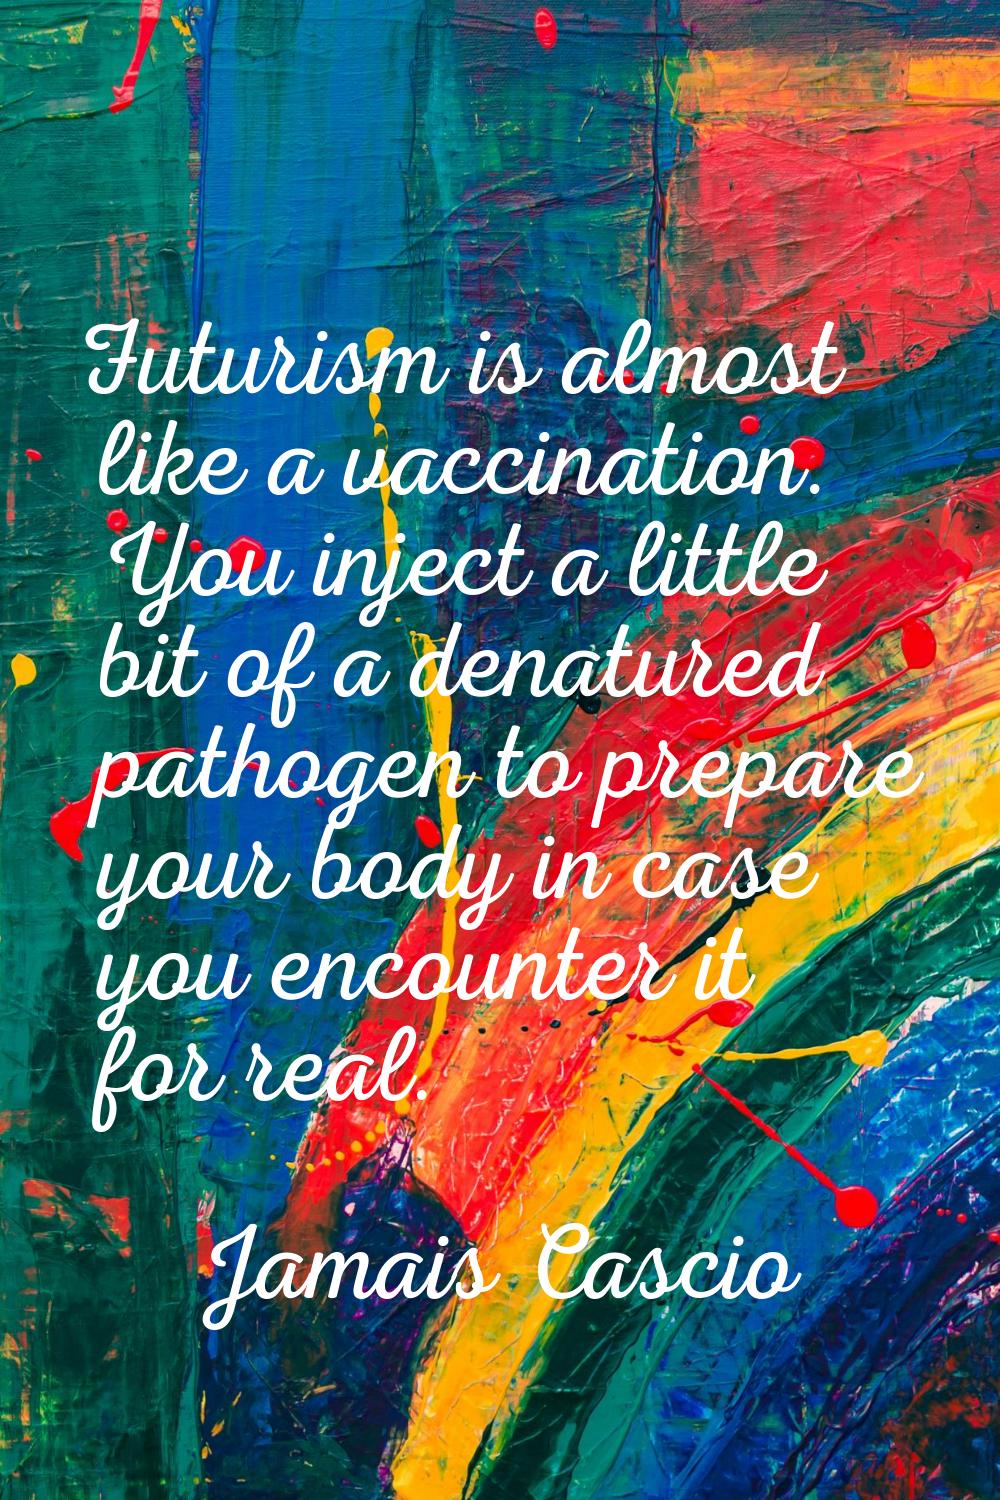 Futurism is almost like a vaccination. You inject a little bit of a denatured pathogen to prepare y